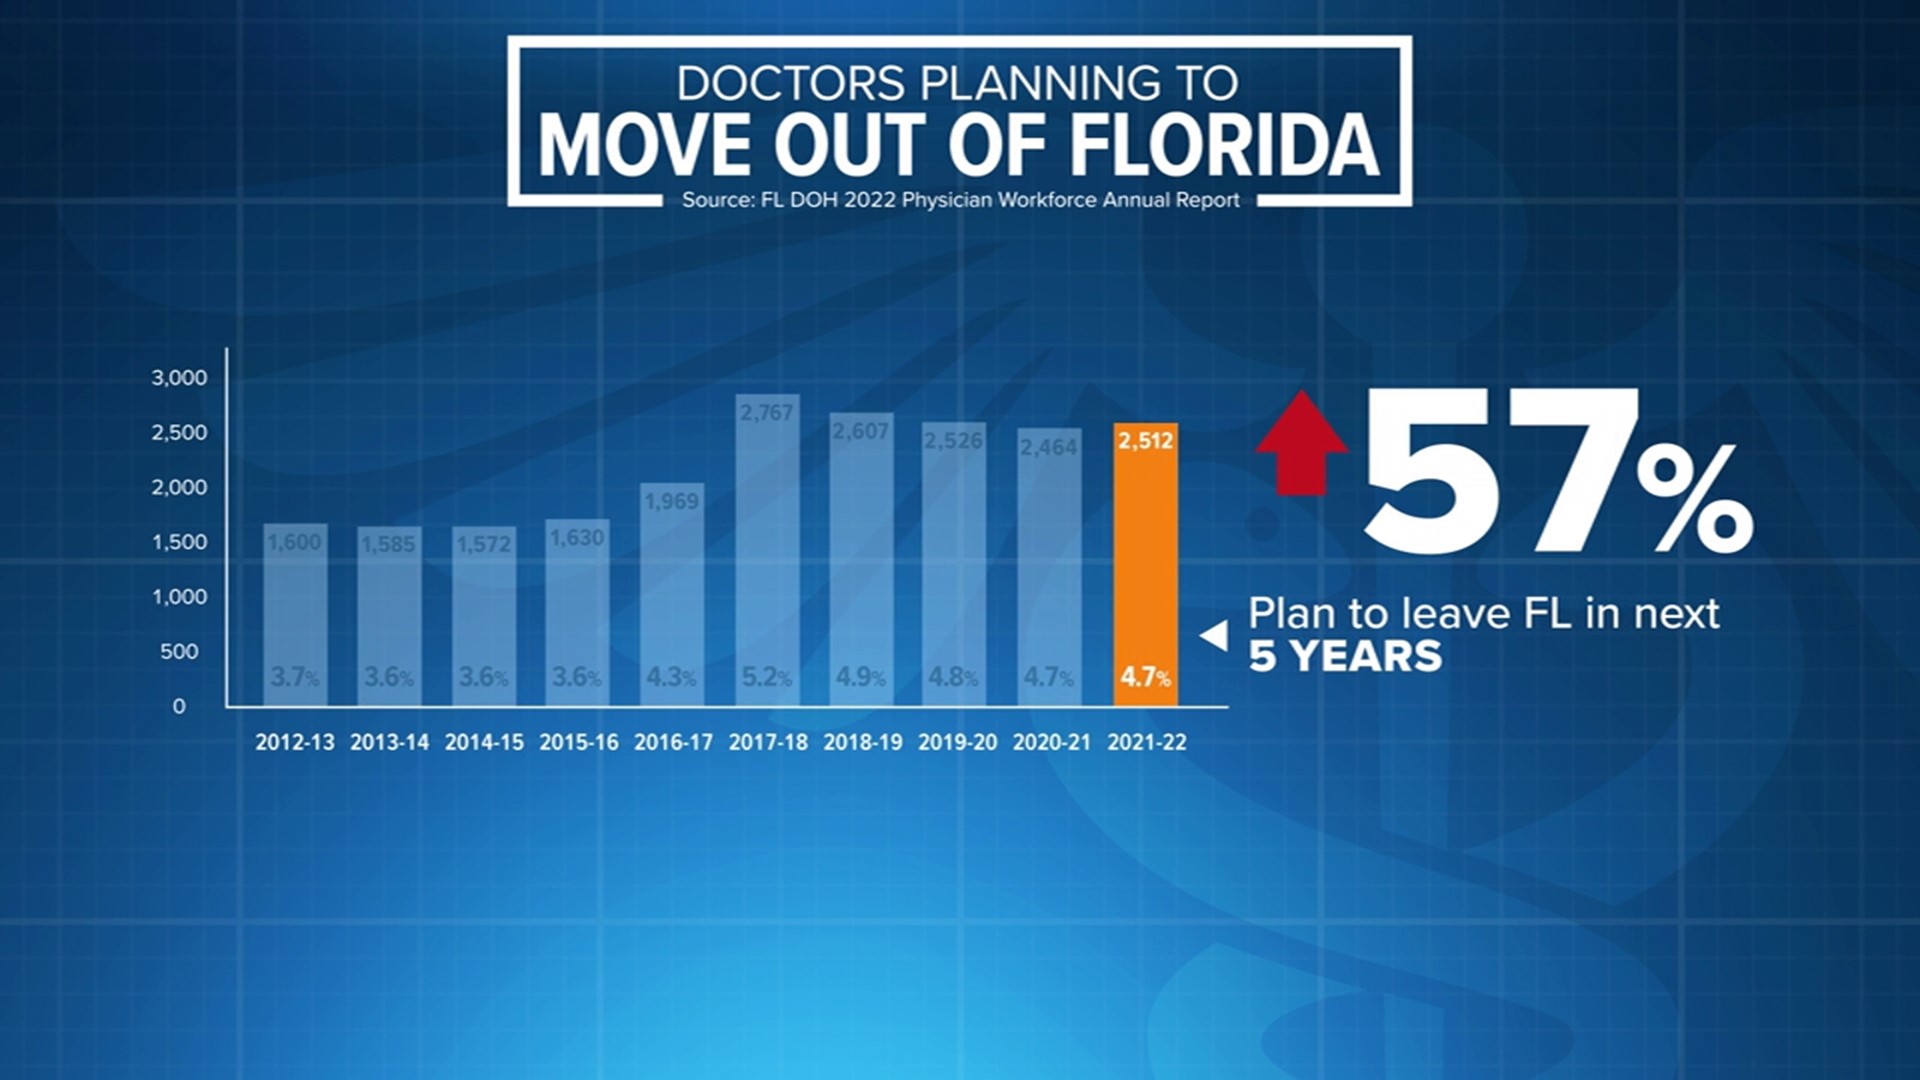 Over the past 10 years, the number of doctors planning to move out of Florida has increased 57%.